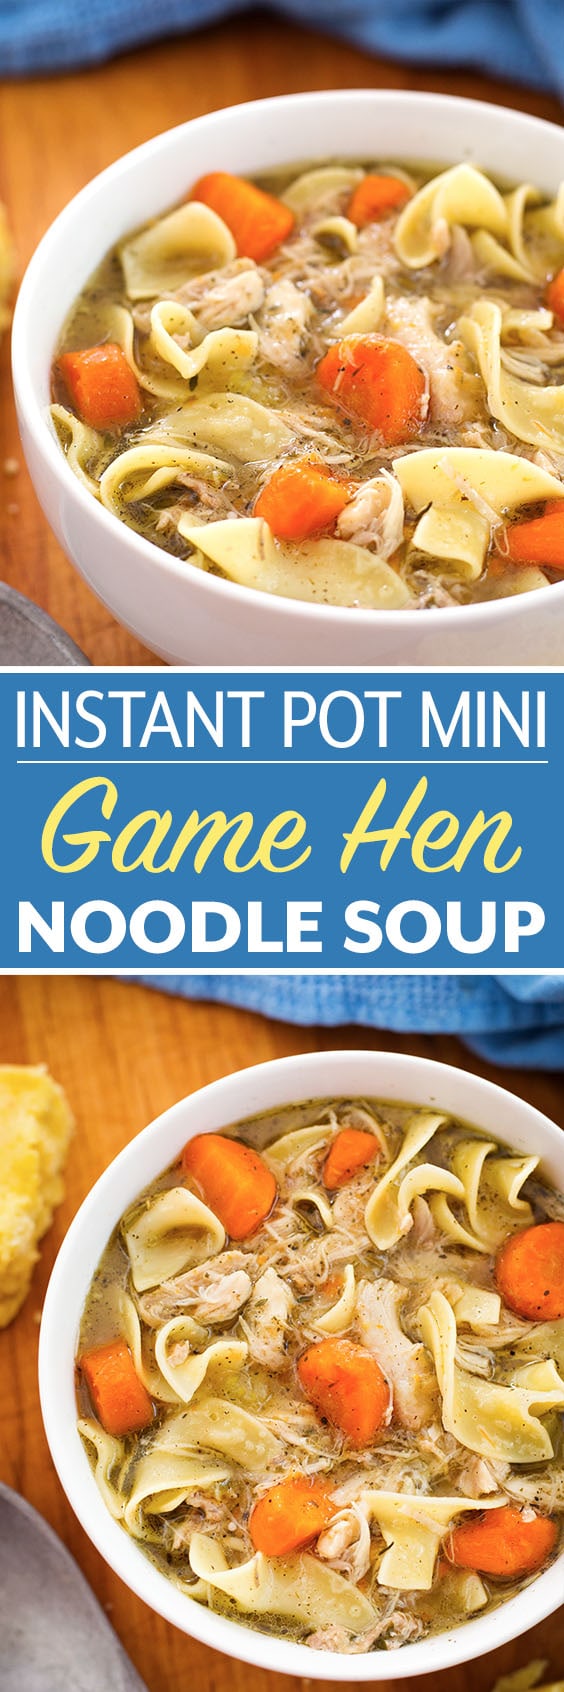 Instant Pot Mini - Game Hen Noodle Soup for the 3 quart electric pressure cooker. Comforting like chicken noodle soup, but made with a Cornish game hen. Simple to make, and quick, too! simplyhappyfoodie.com #Instantpotchickennoodlesoup #instantpotgamehen